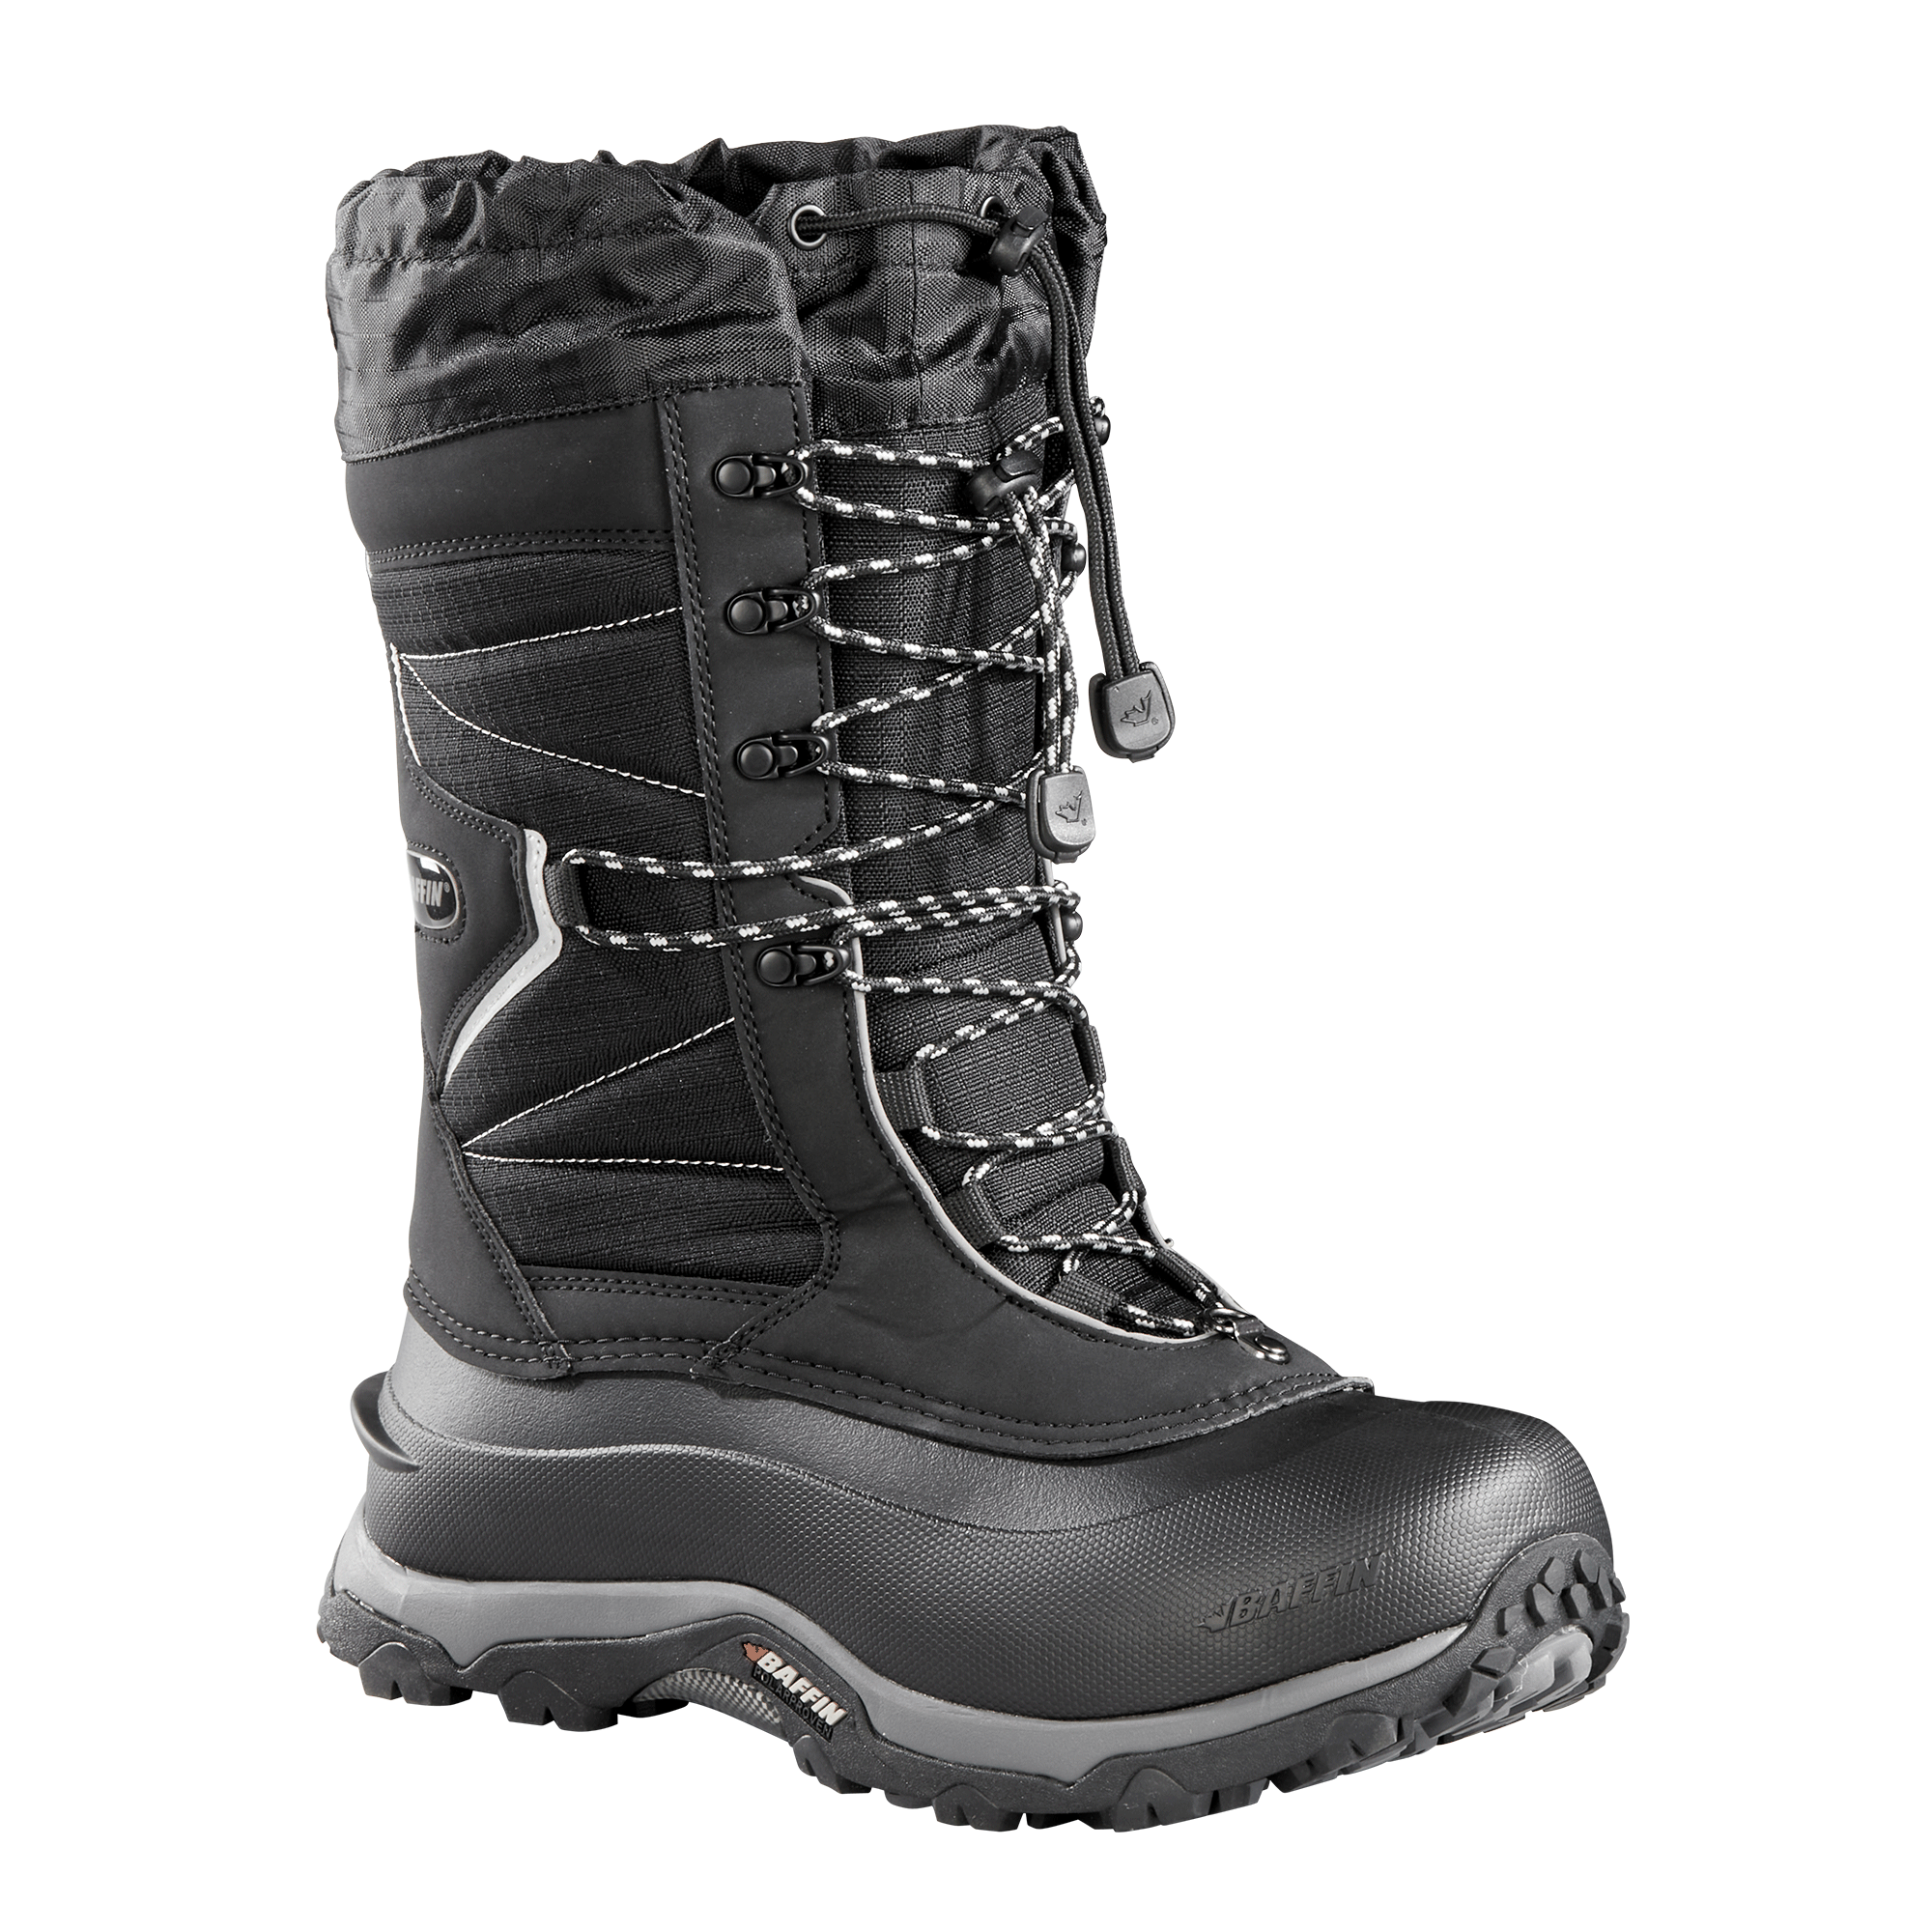 Baffin Evolution Boots - Comfort and warmth, no matter the conditions! 